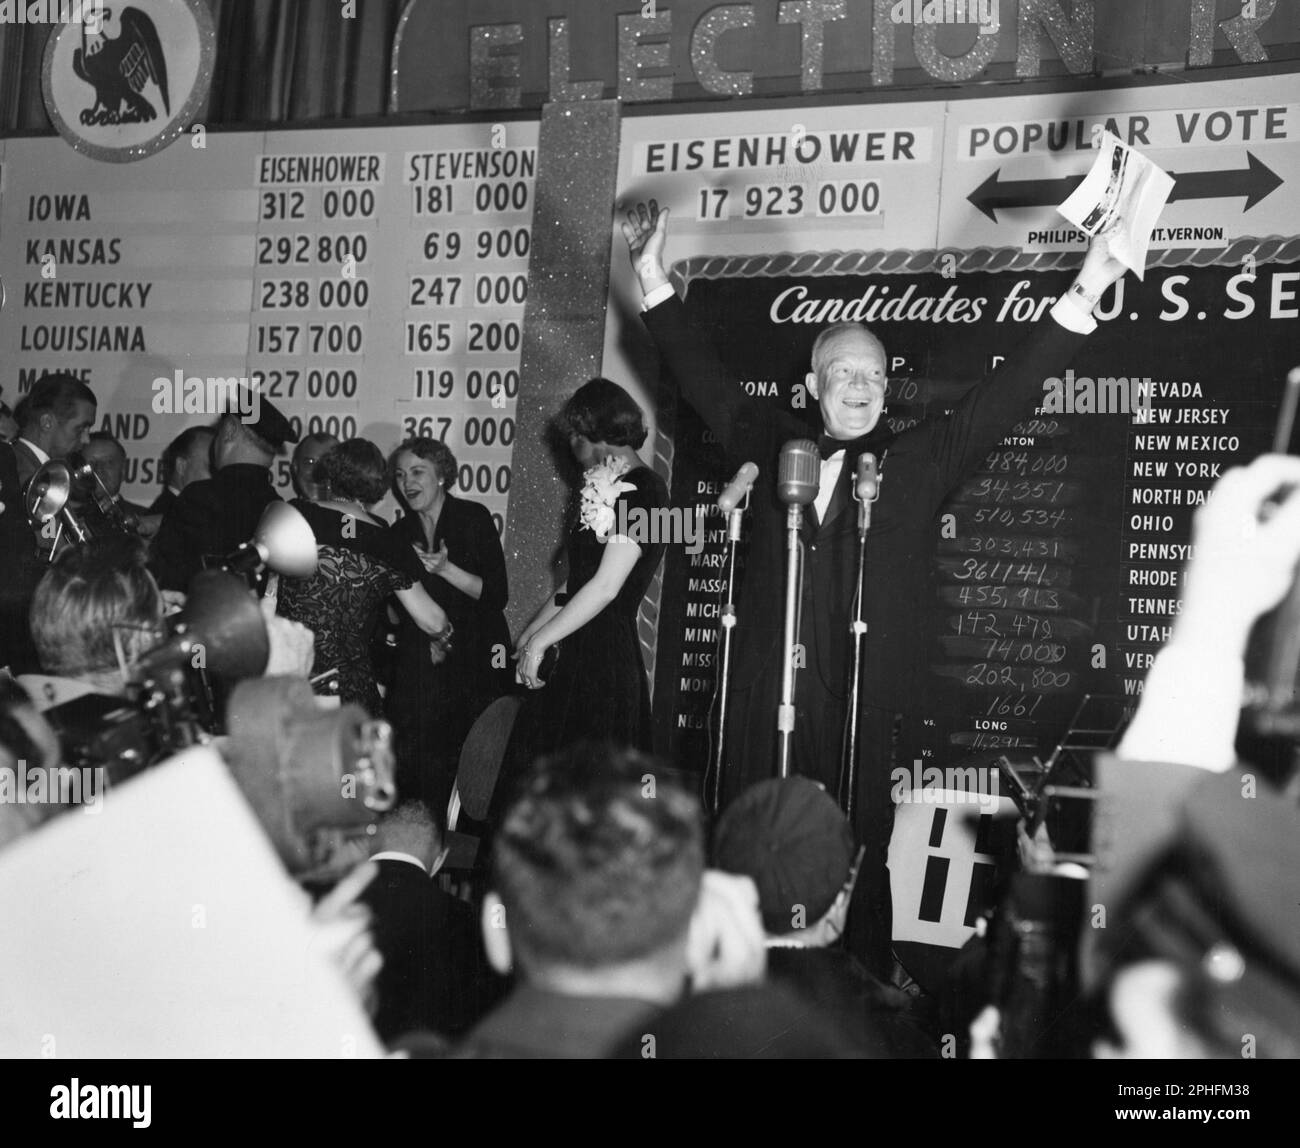 The famous Eisenhower grin breaks out as General Dwight D Eisenhower waves to enthusiastic supporters at the Commodore Hotel on election night, New York, NY, 11/4/1952. (Photo by United States Information Agency Stock Photo